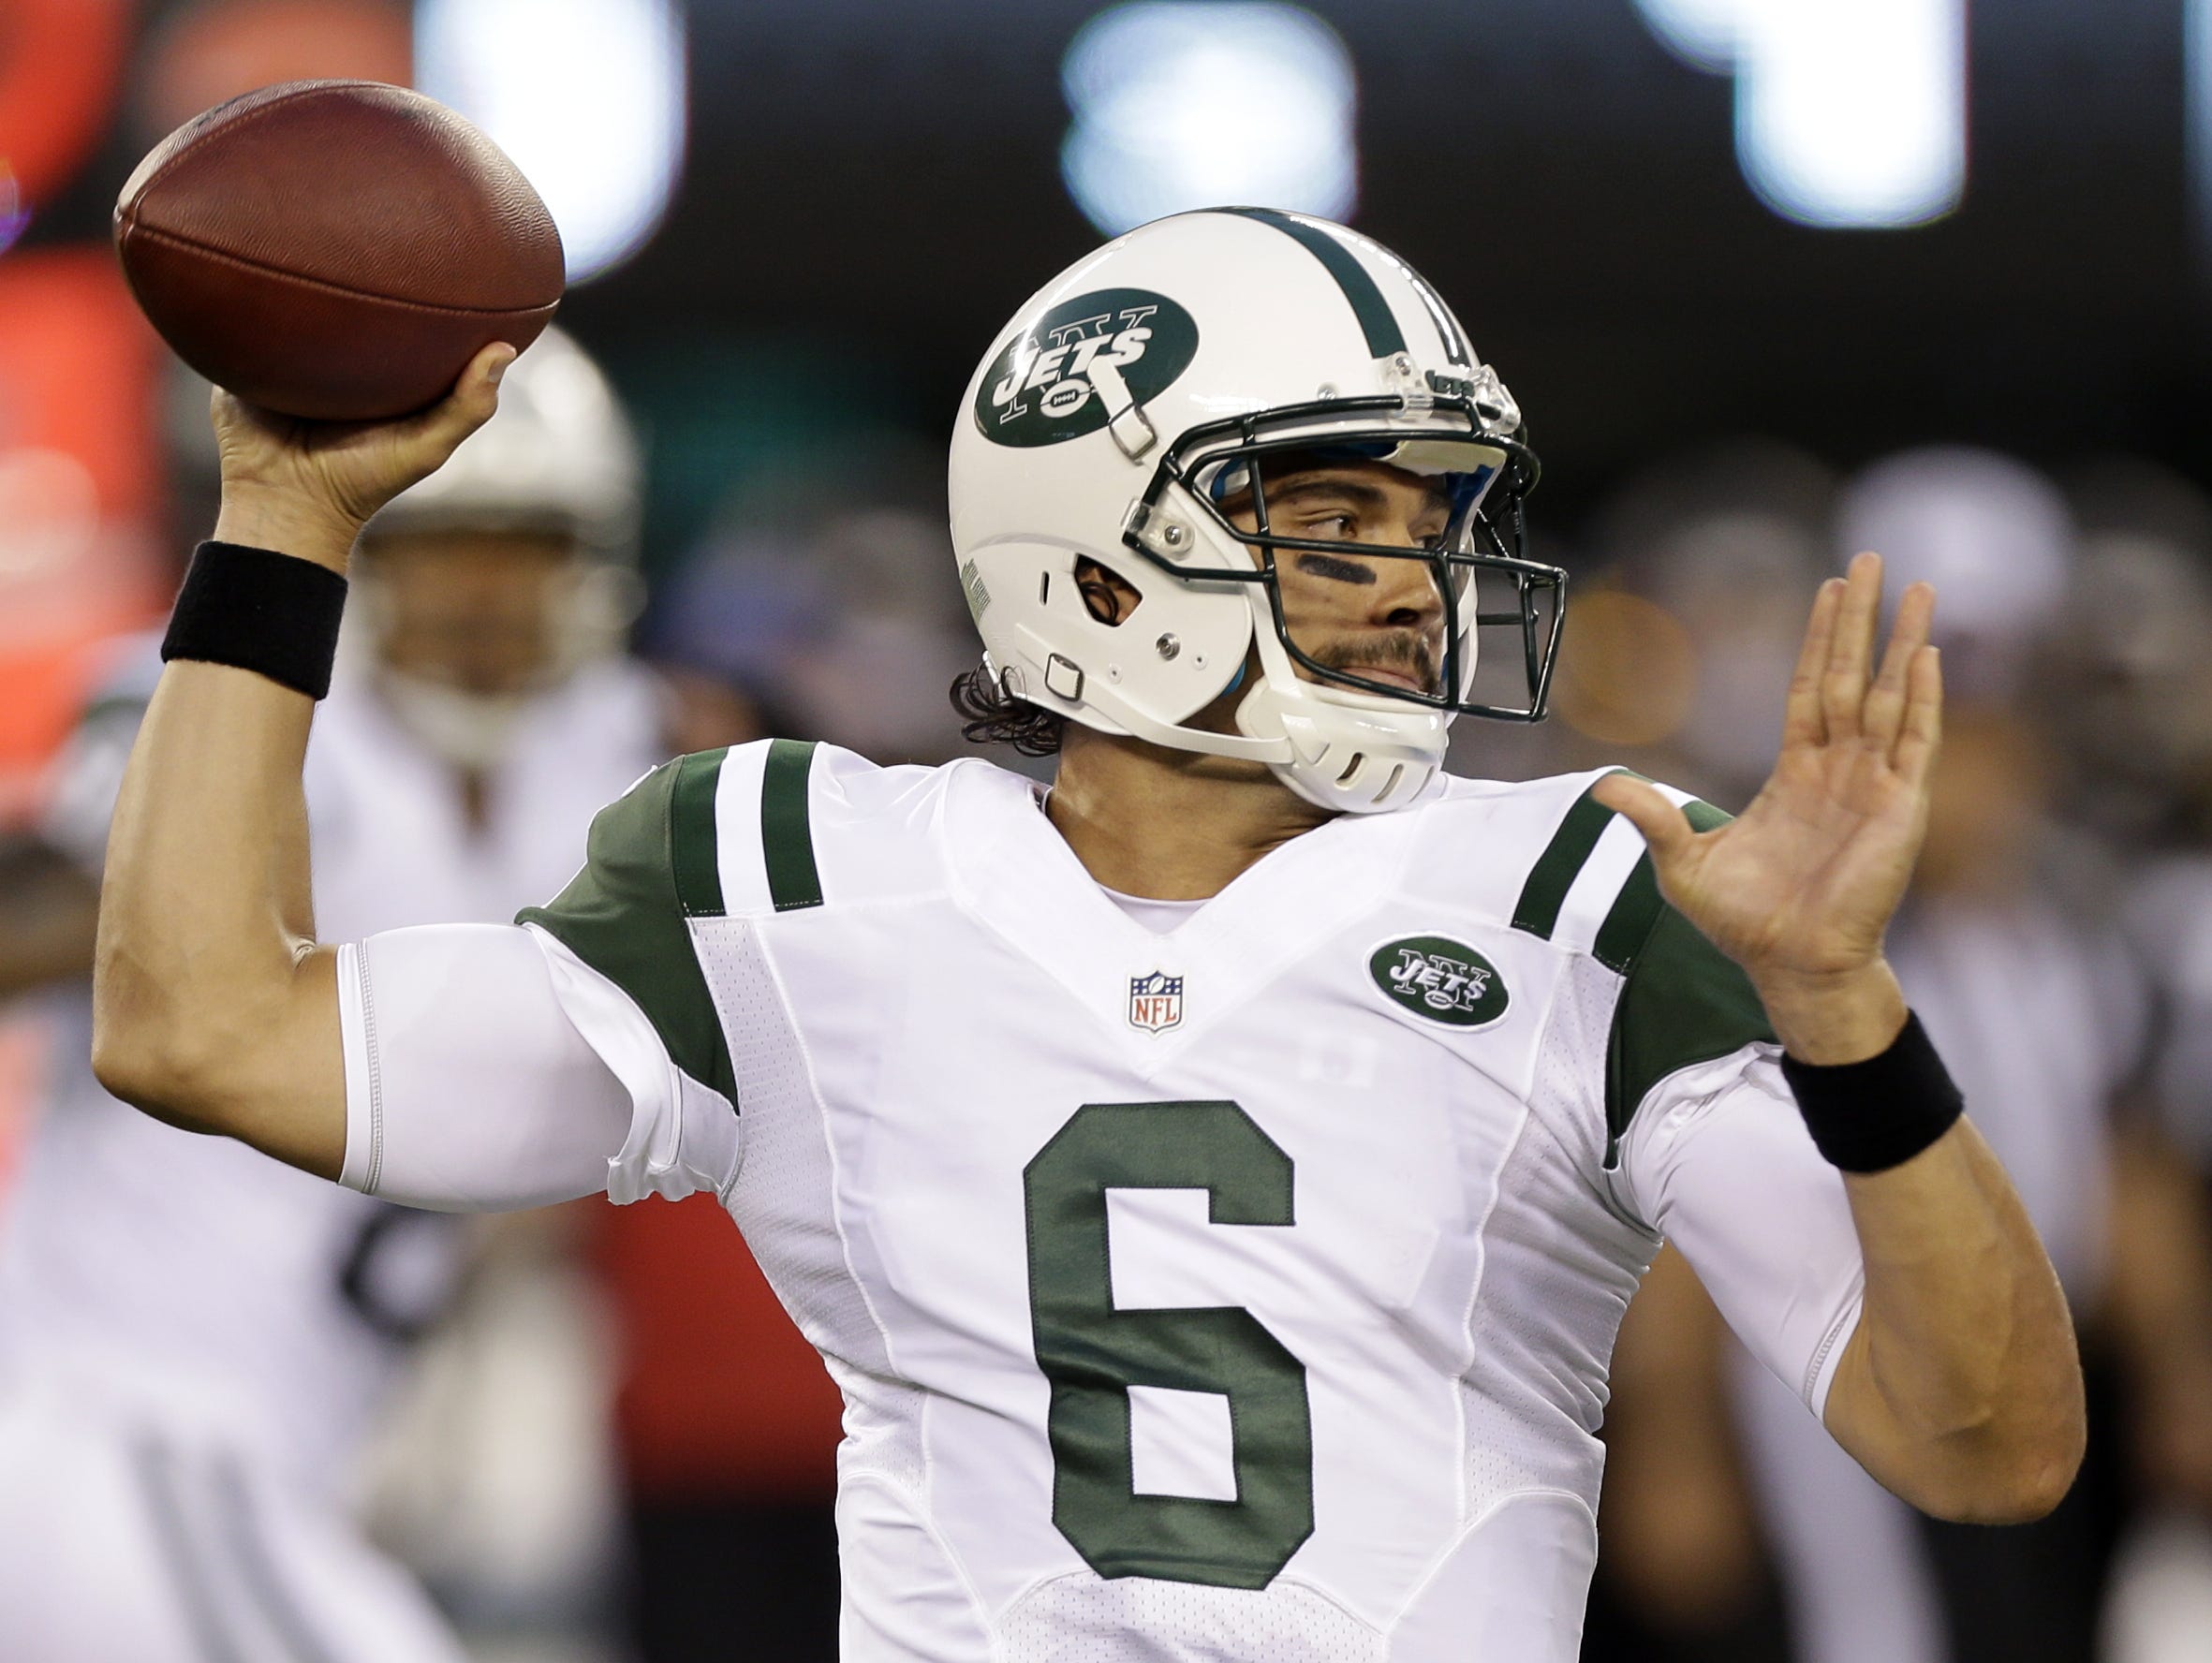 Who are the top 10 Jets quarterbacks of all time?